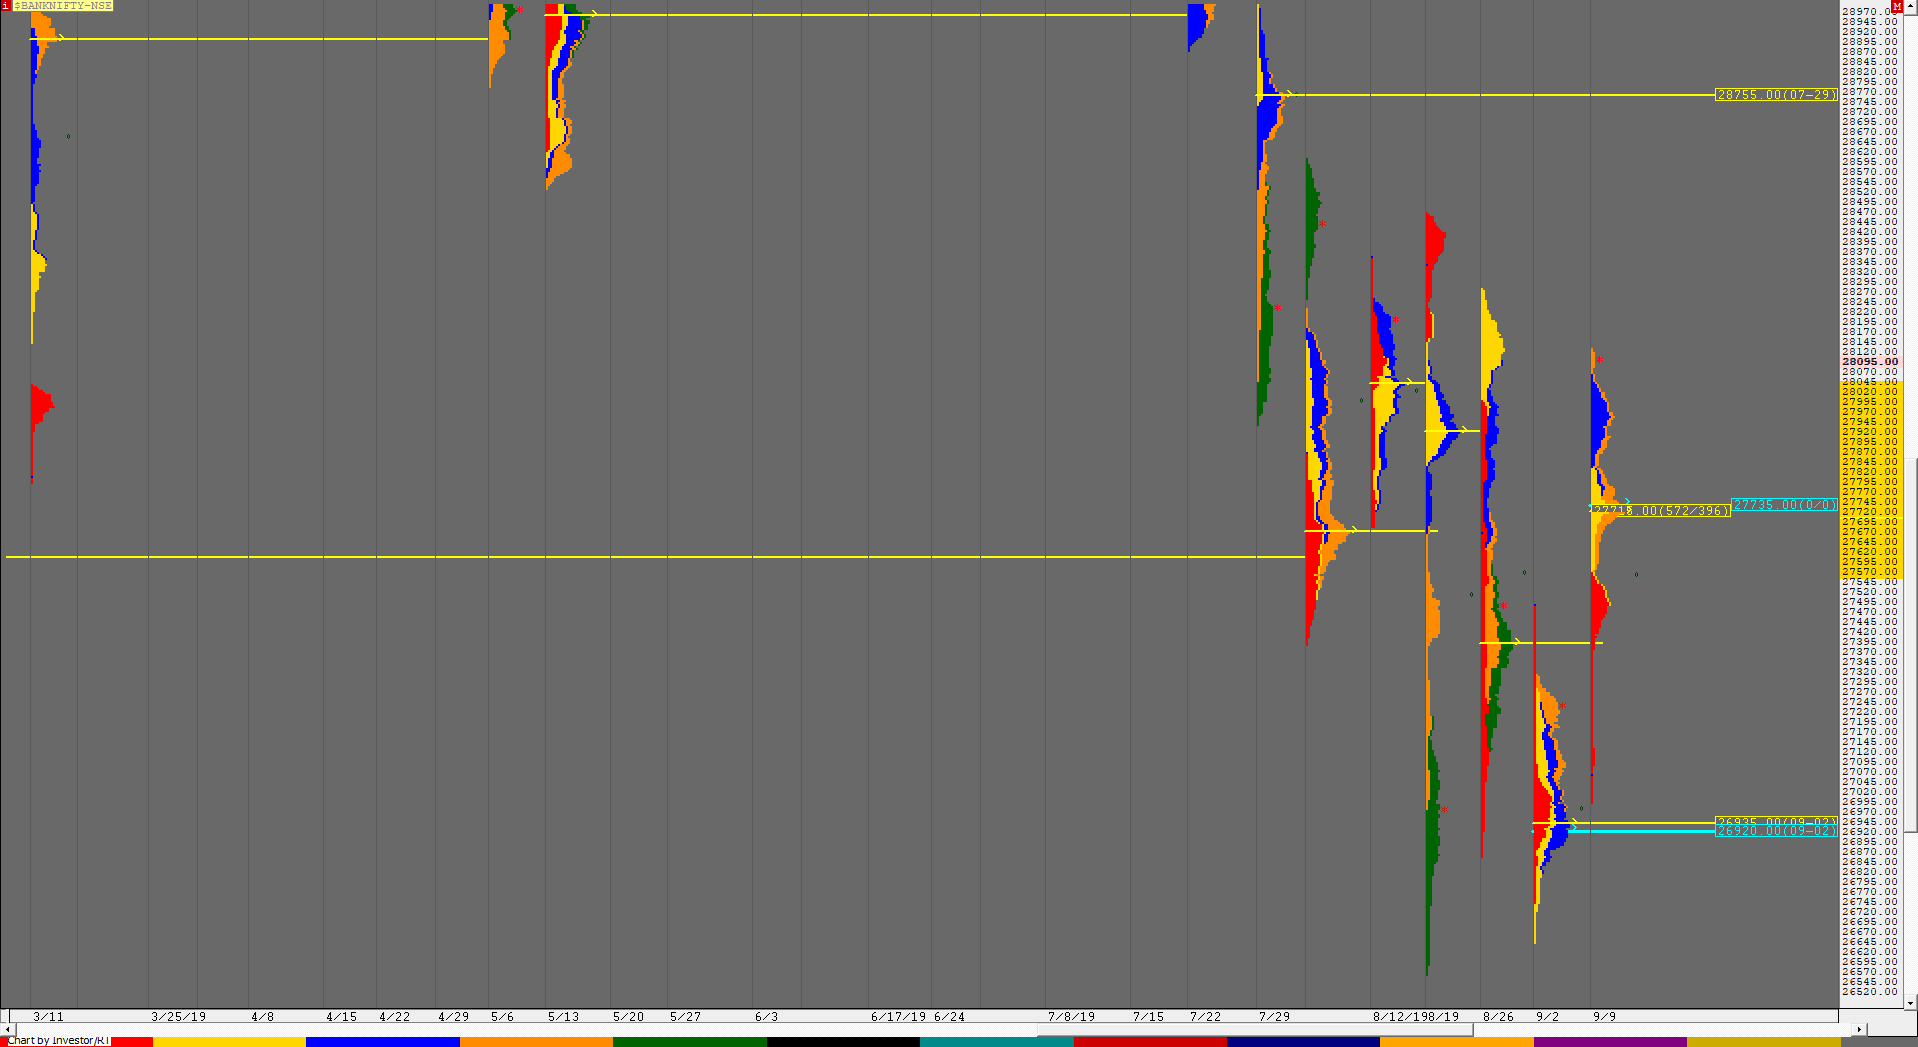 Bn Weekly 2 Weekly Charts (9Th To 13Th September) And Market Profile Analysis Banknifty Futures, Charts, Day Trading, Intraday Trading, Intraday Trading Strategies, Market Profile, Market Profile Trading Strategies, Nifty Futures, Order Flow Analysis, Support And Resistance, Technical Analysis, Trading Strategies, Volume Profile Trading